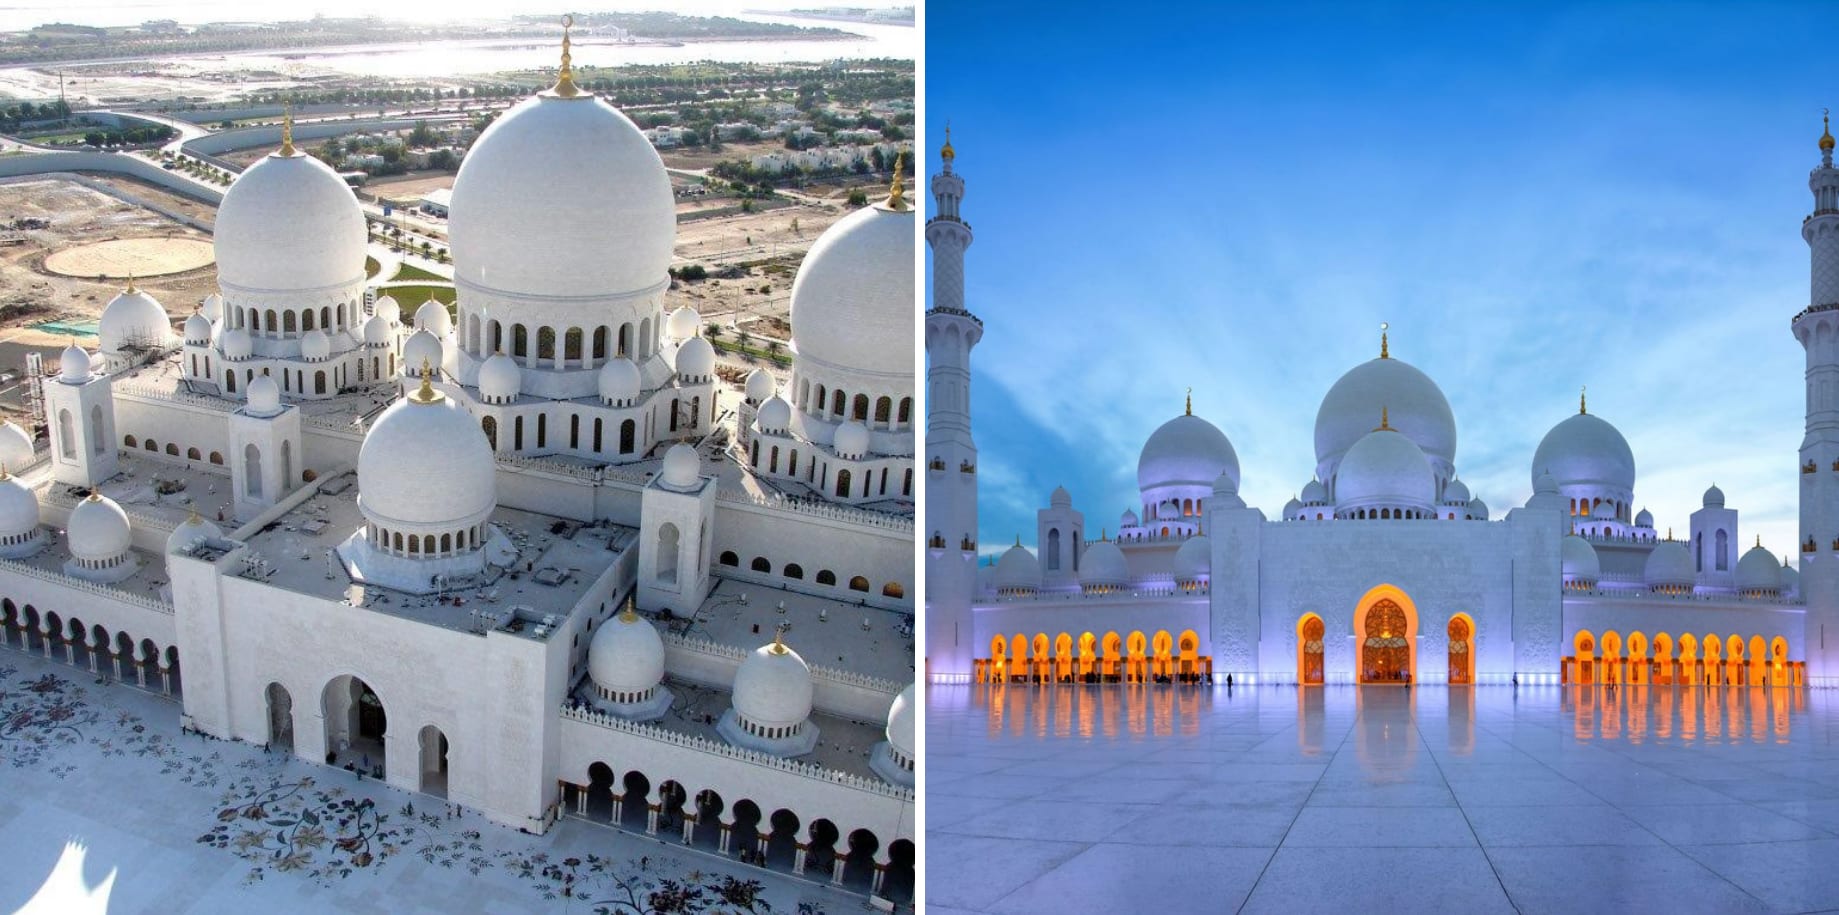 Birds-eye and frontal view of the Sheikh Zayed Grand Mosque 